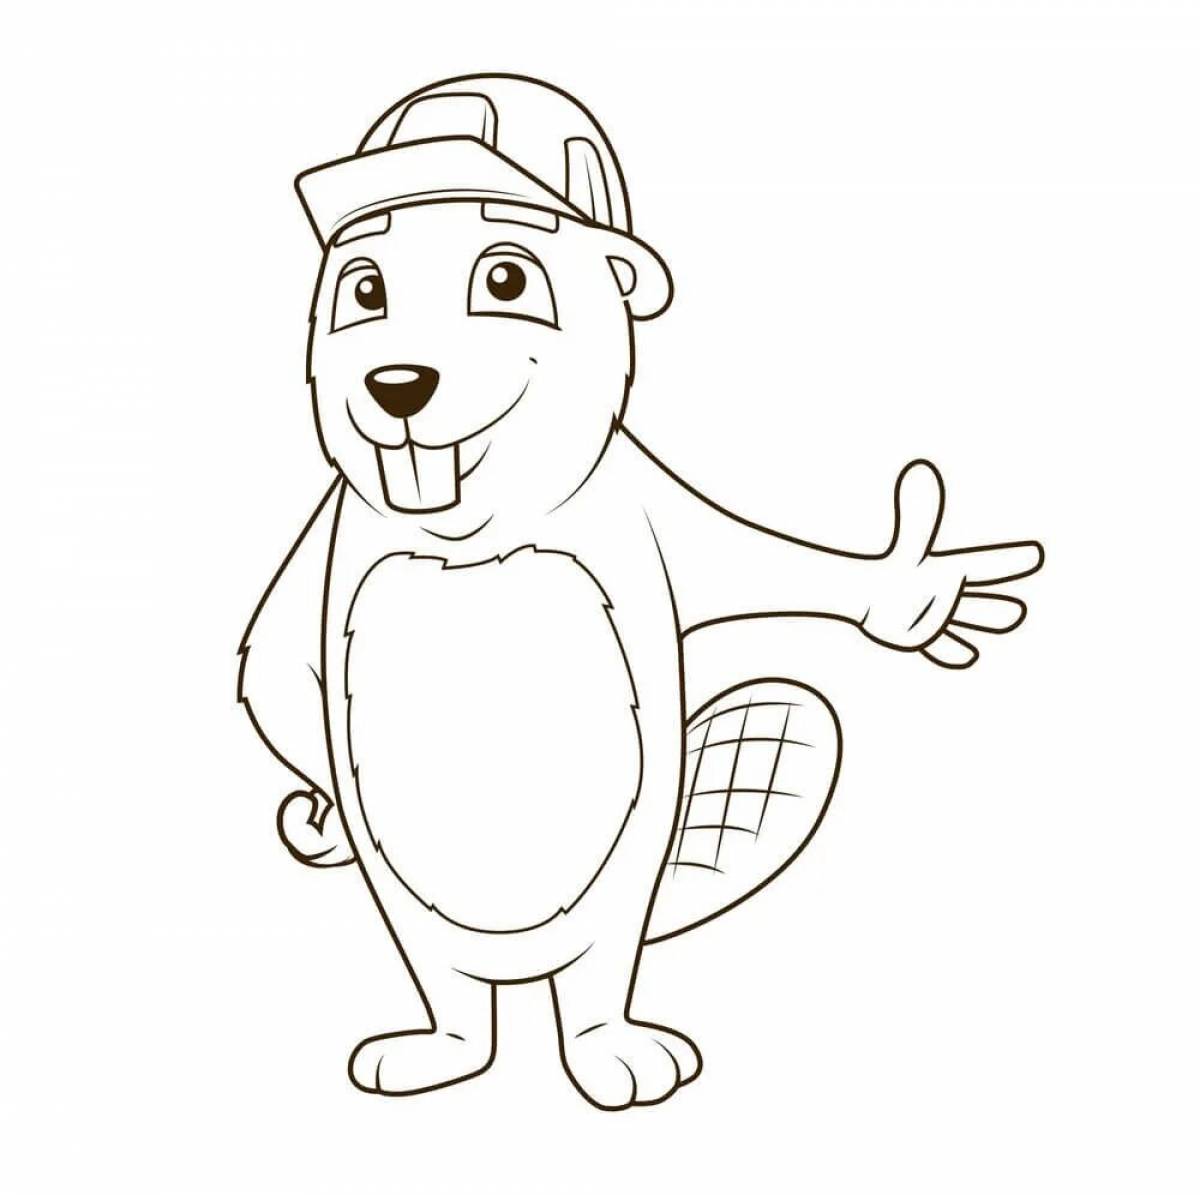 Coloring page spectacular beaver